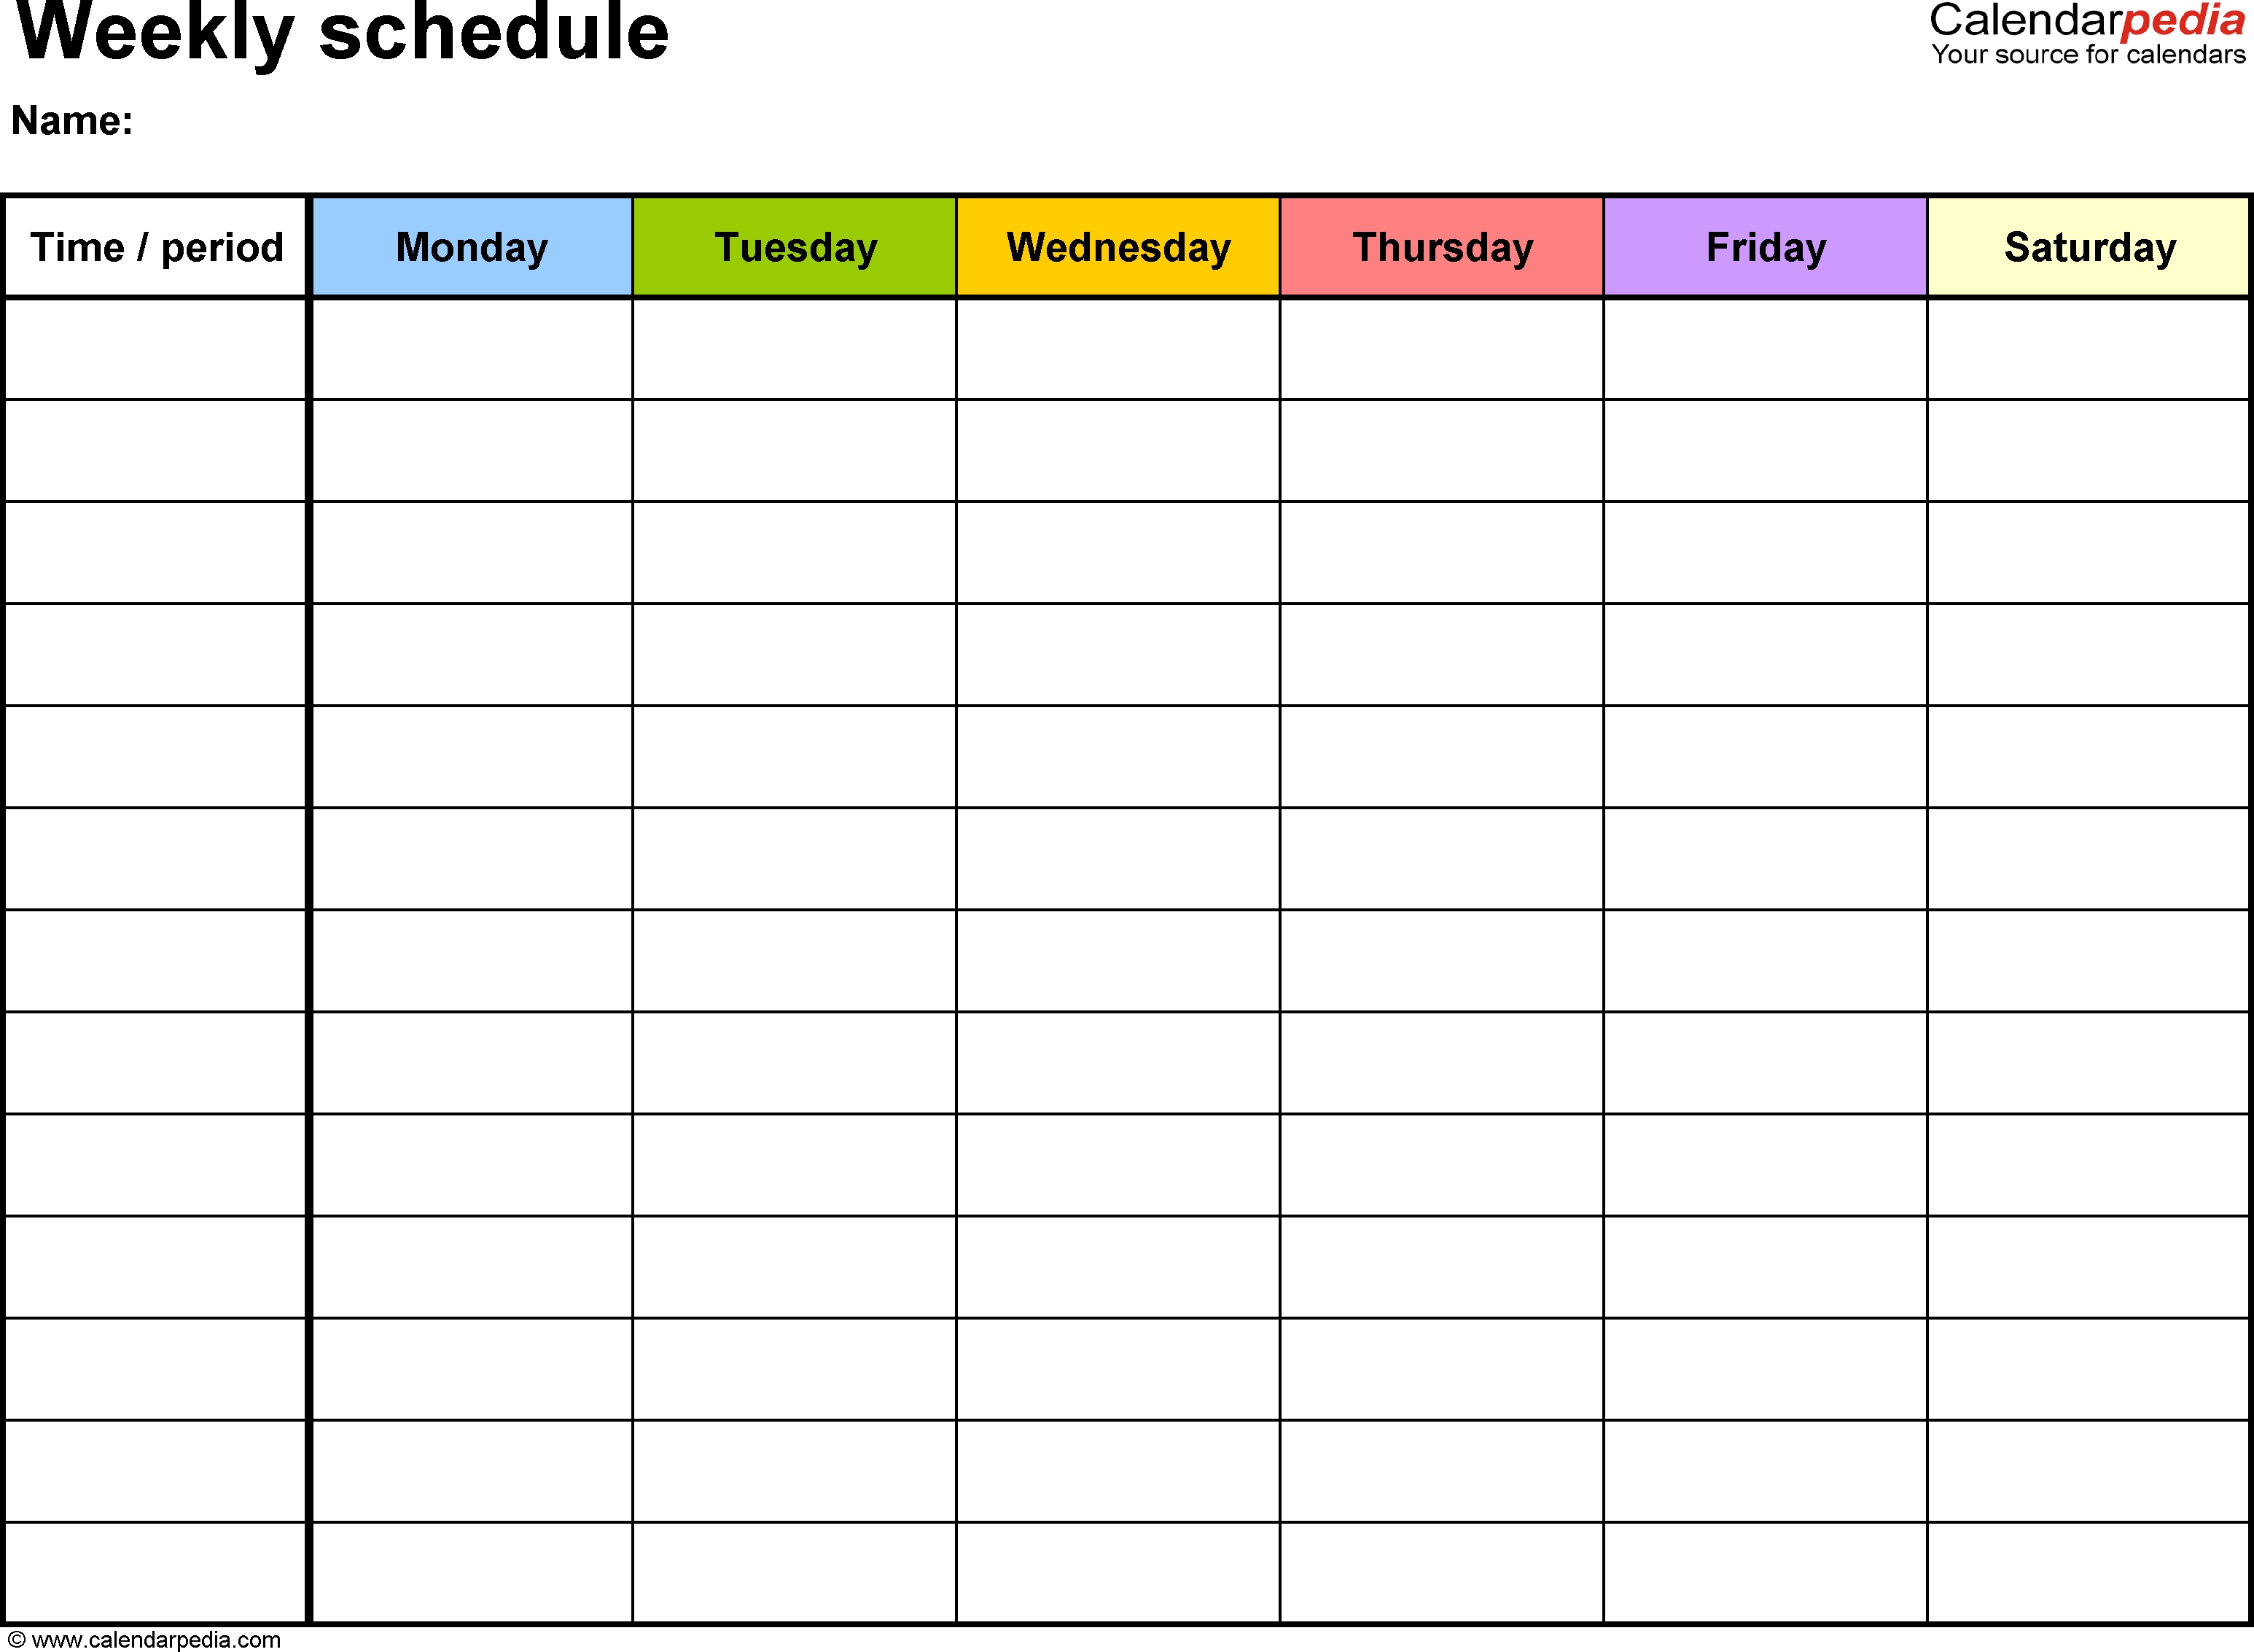 Free Weekly Schedule Templates For Word - 18 Templates regarding Monday Through Friday Calendar Template